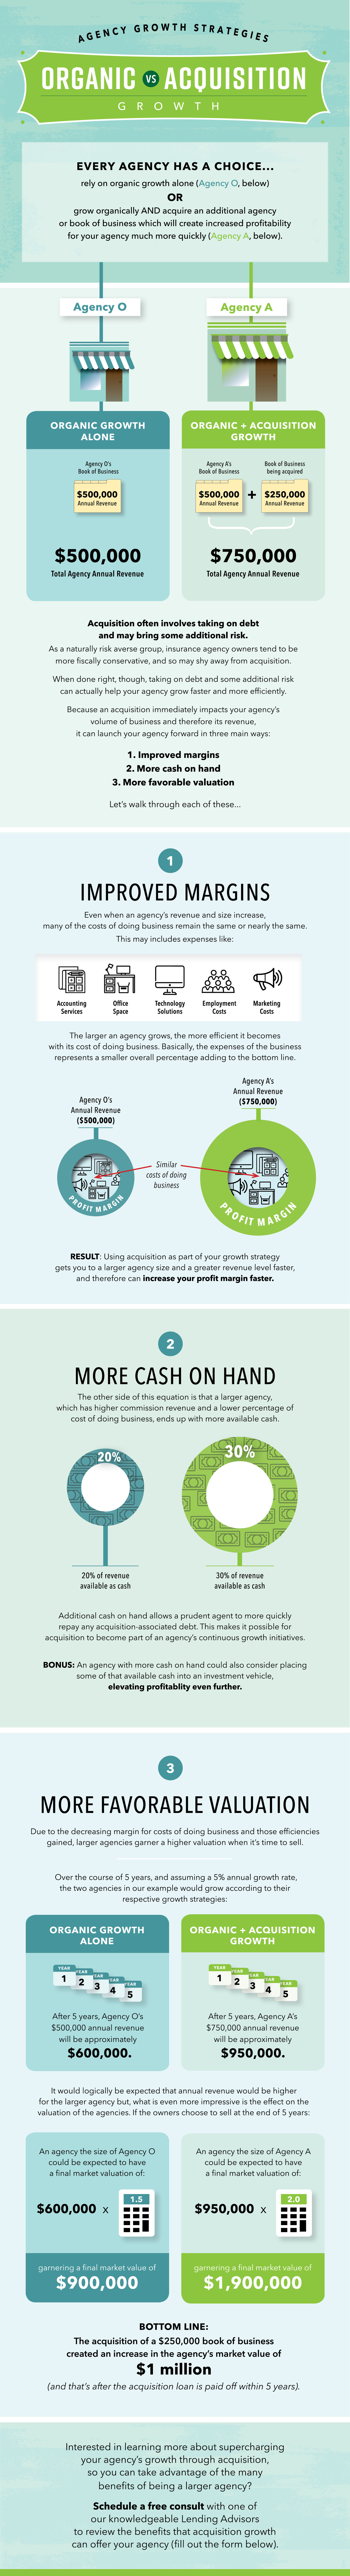 organic vs acquisition growth infographic